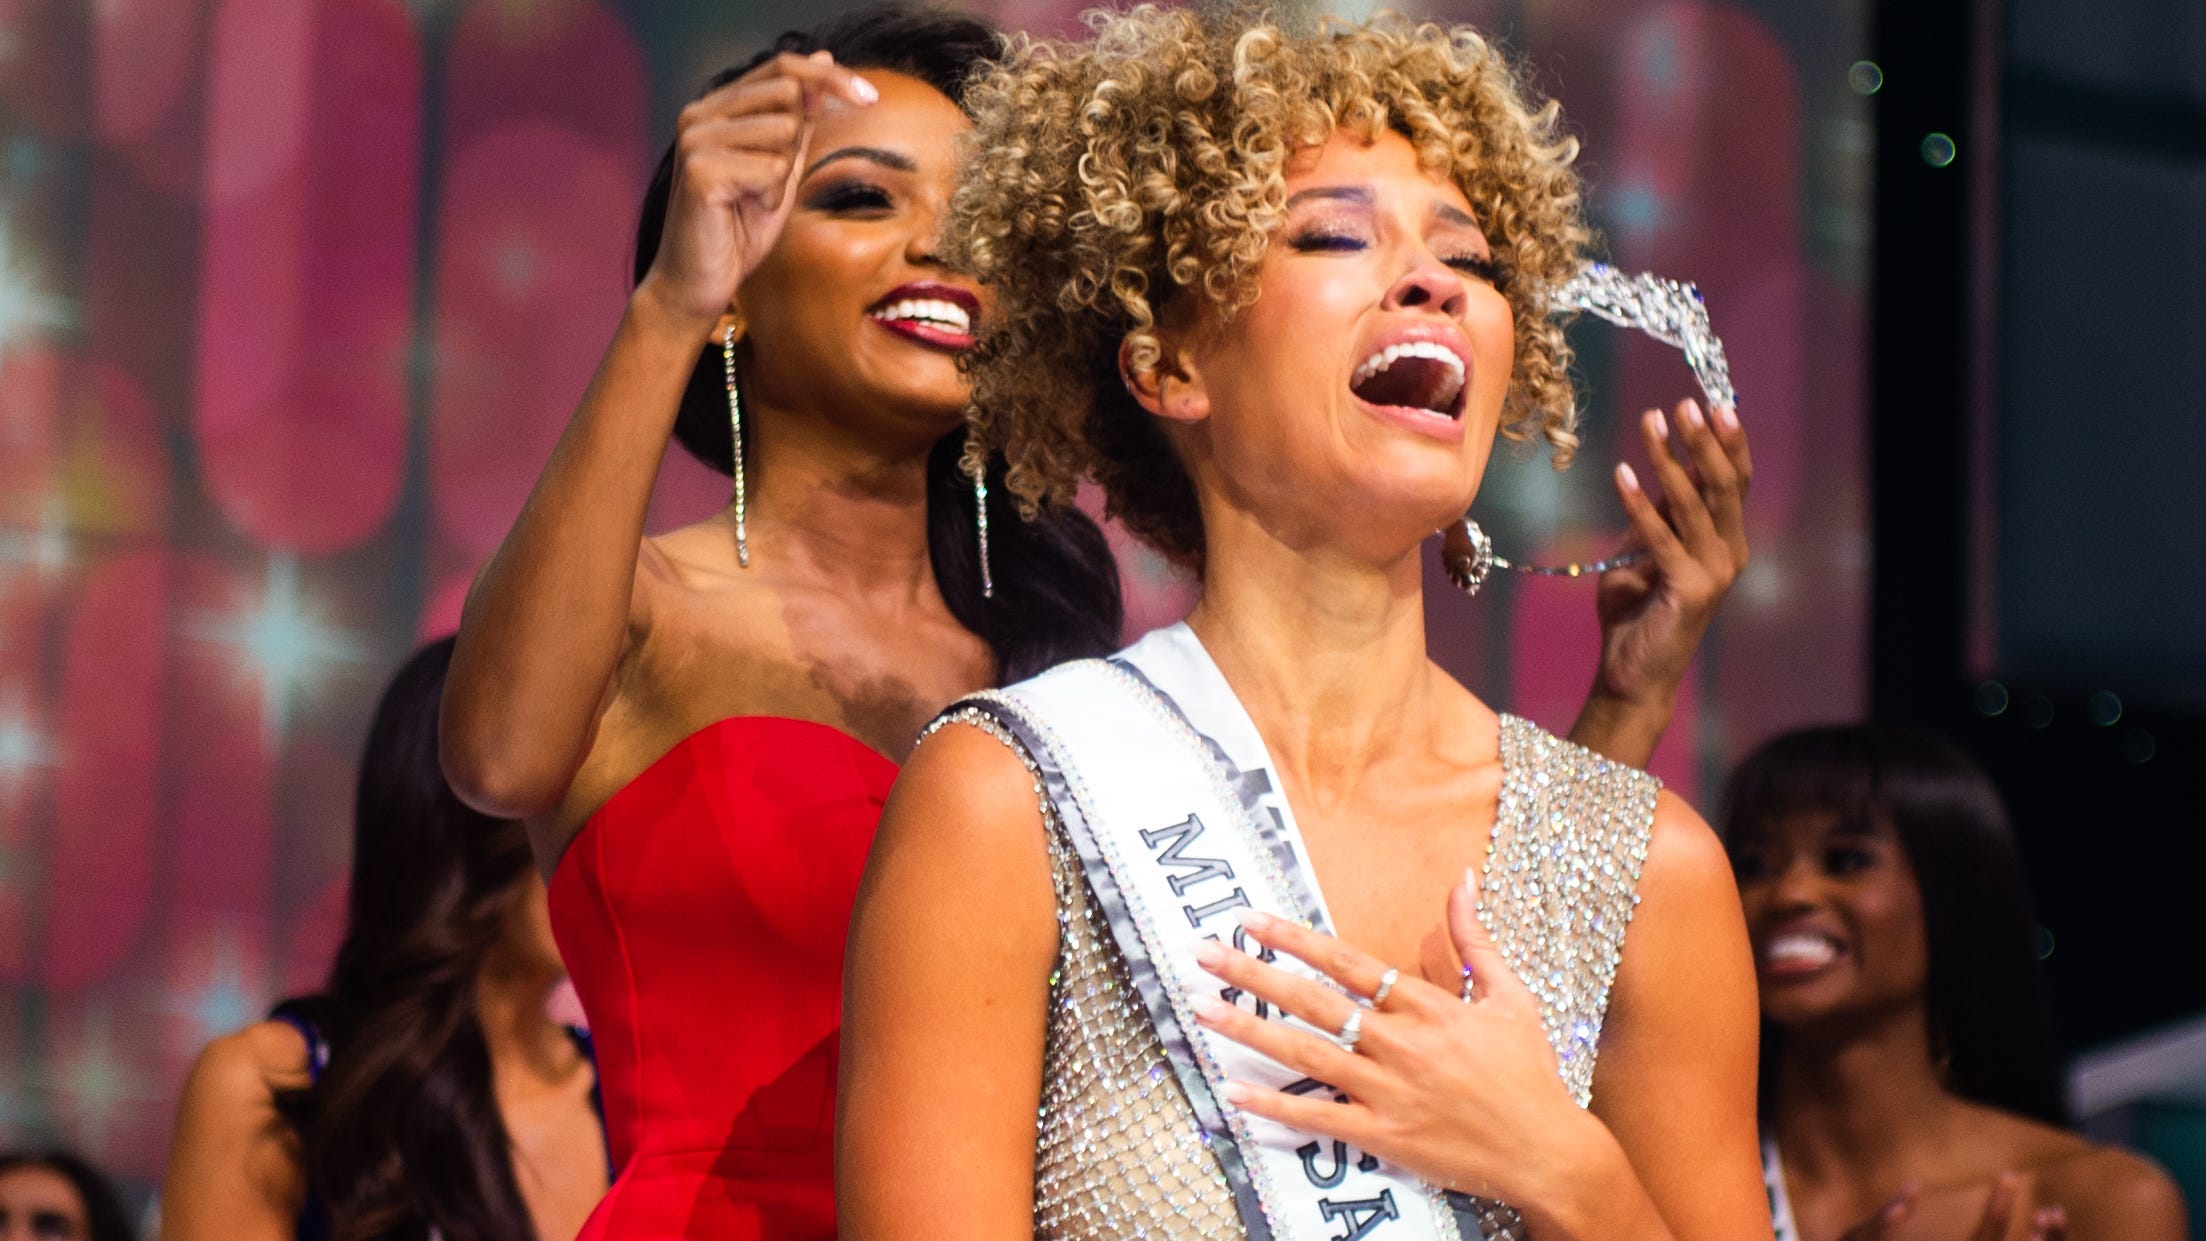 Elle Smith, Mss Kentucky, is crowned Miss USA